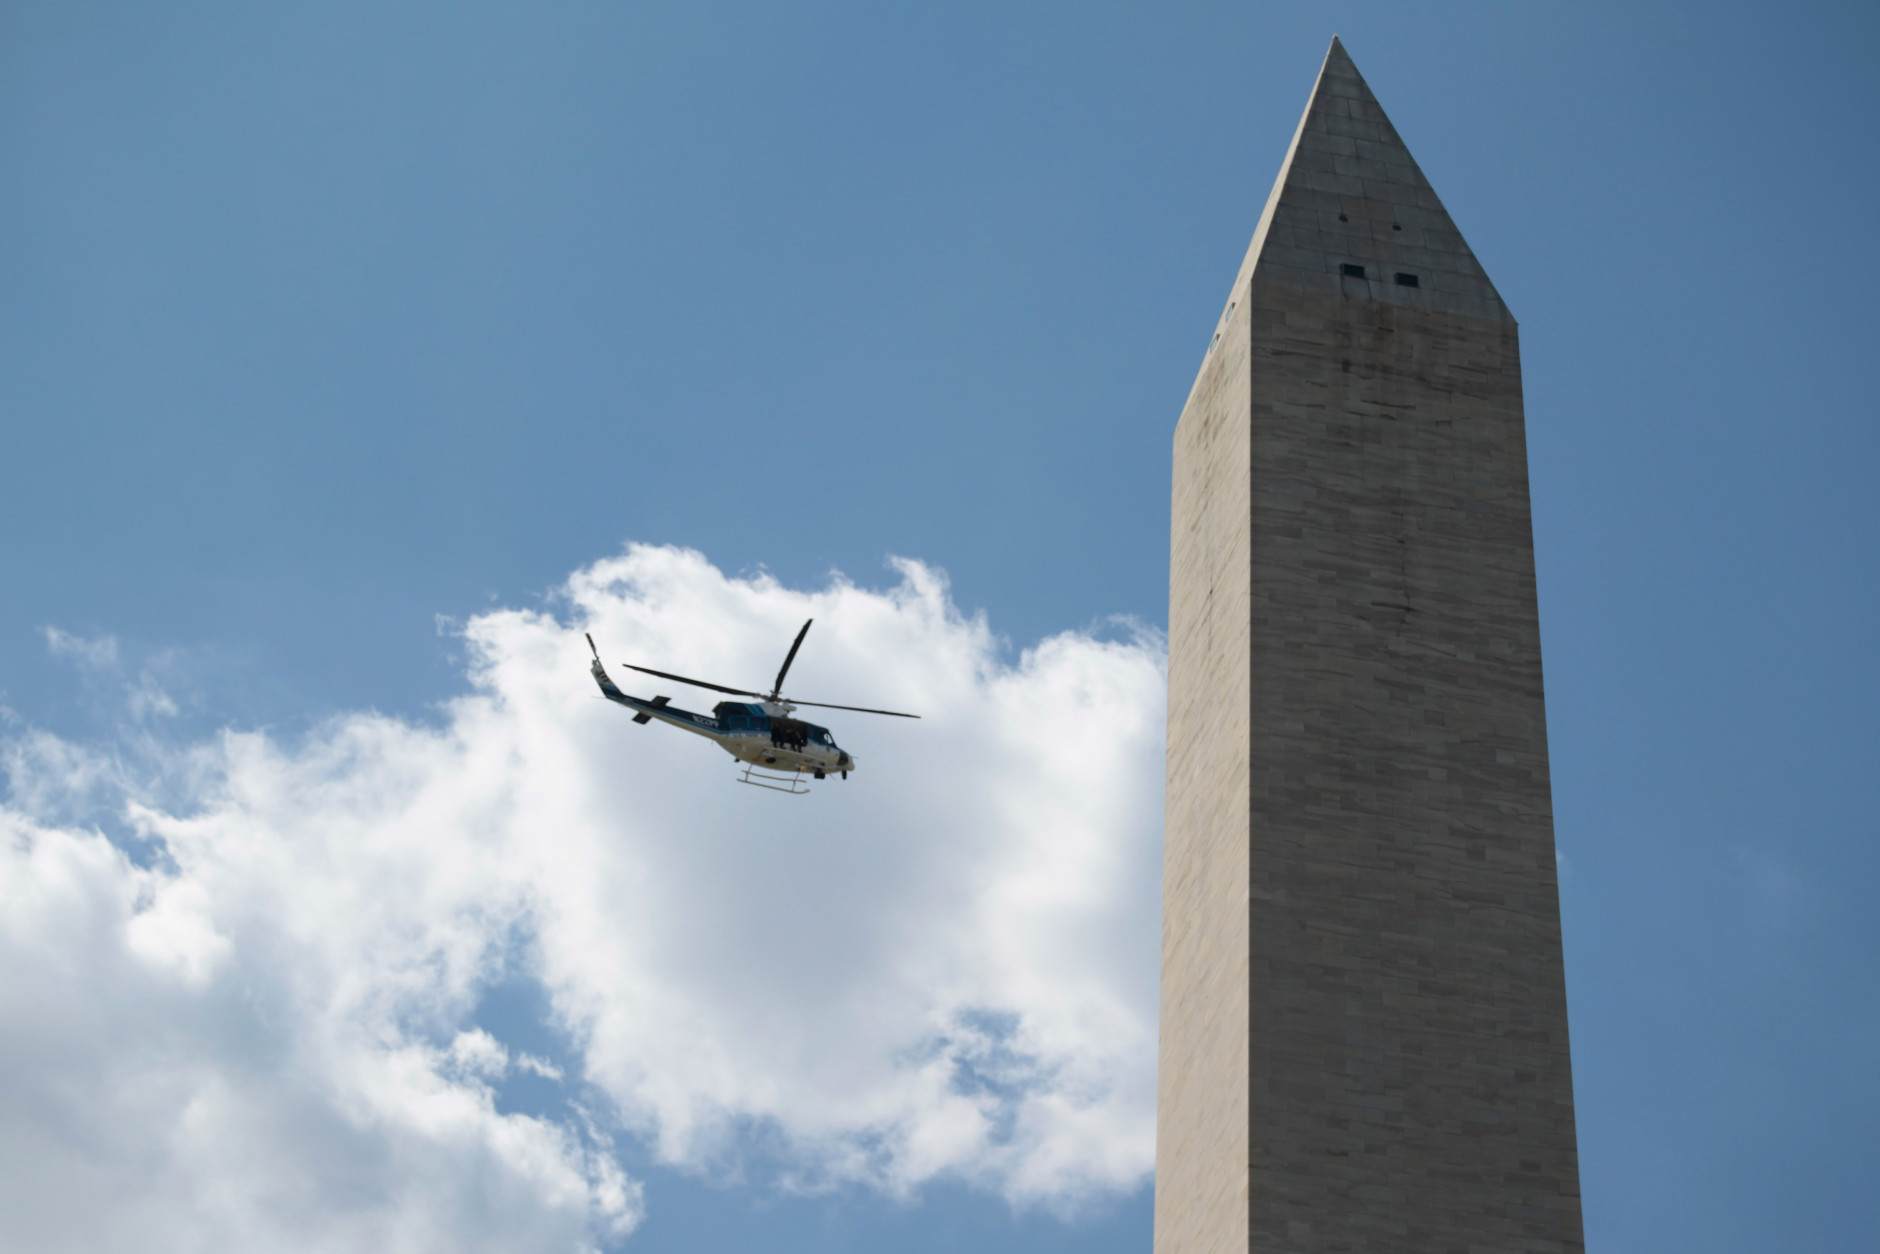 The Government Accountability Office will study helicopter noise in the national capital region, at the request of local lawmakers. (Photo by Chip Somodevilla/Getty Images)